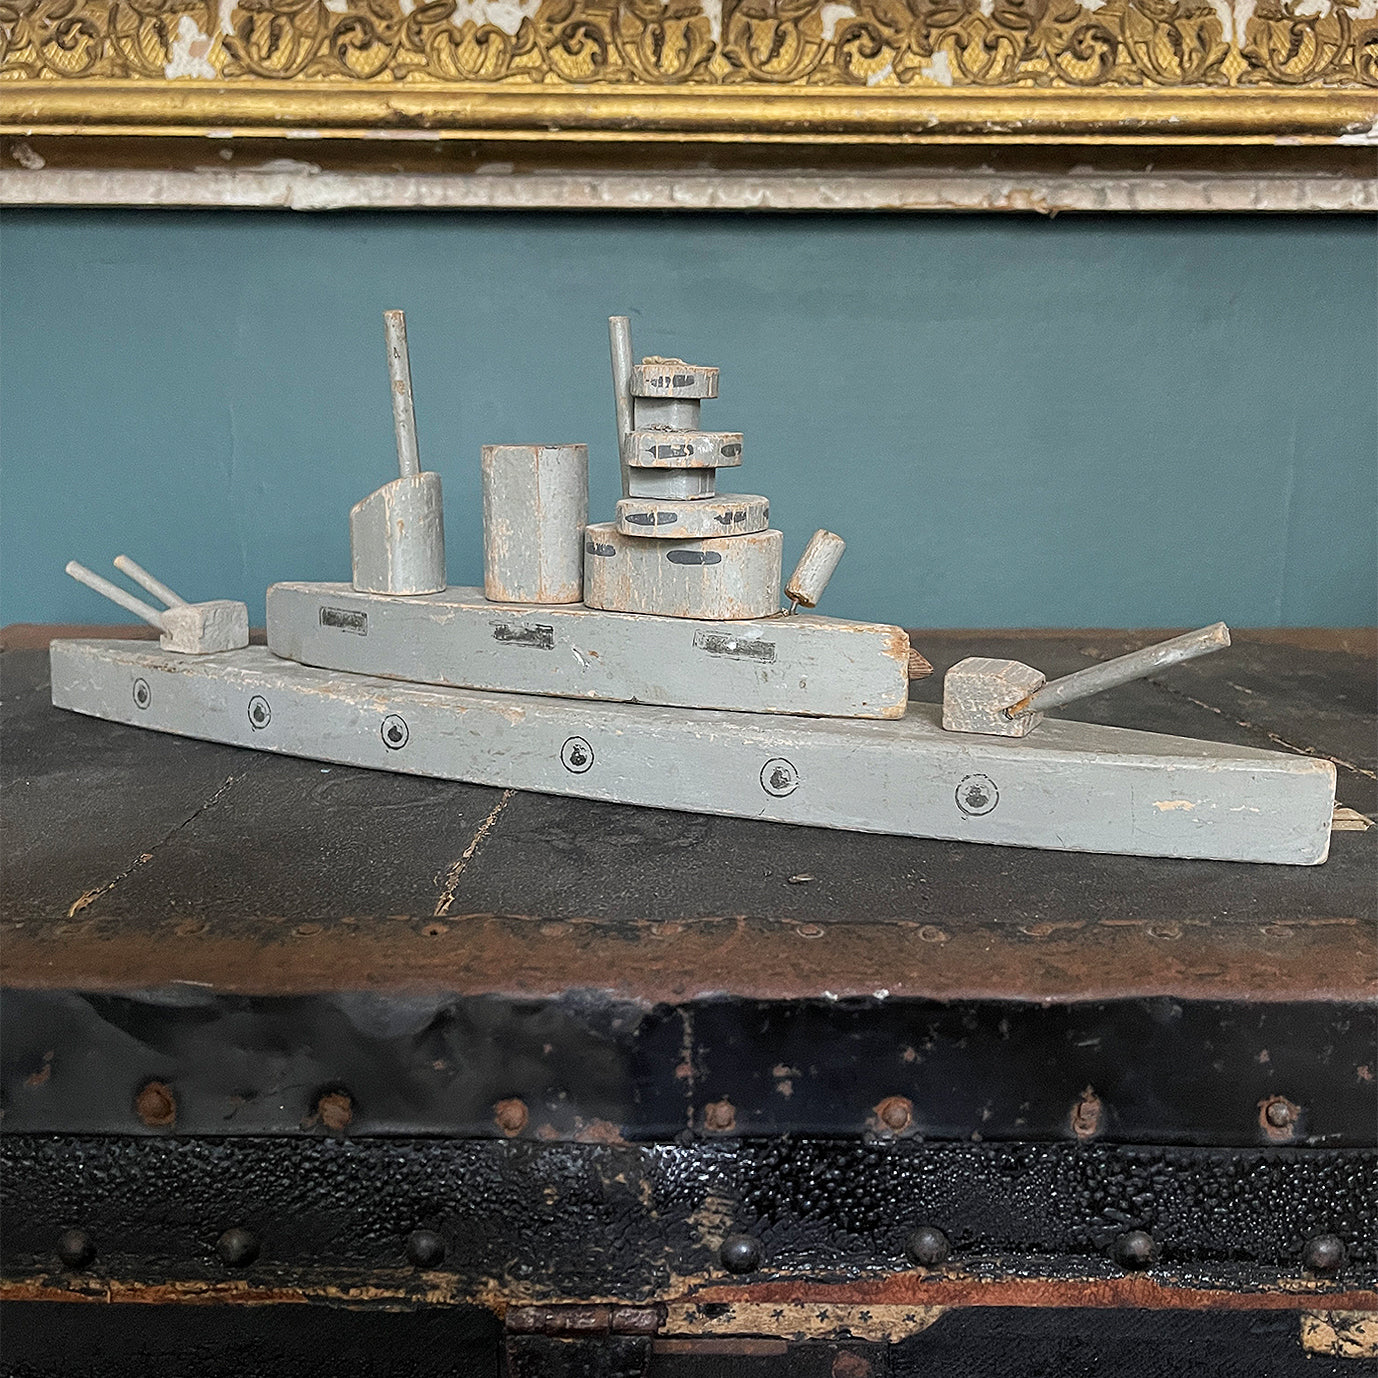 A stylish old wooden Exploding Battle Ship. Two gun turrets, two funnels, bridge and firing torpedo tube. The hull has a pressure button on the side that when struck activates an internal mechanism that explodes the top sections of the ship - SHOP NOW - www.intovintage.co.uk